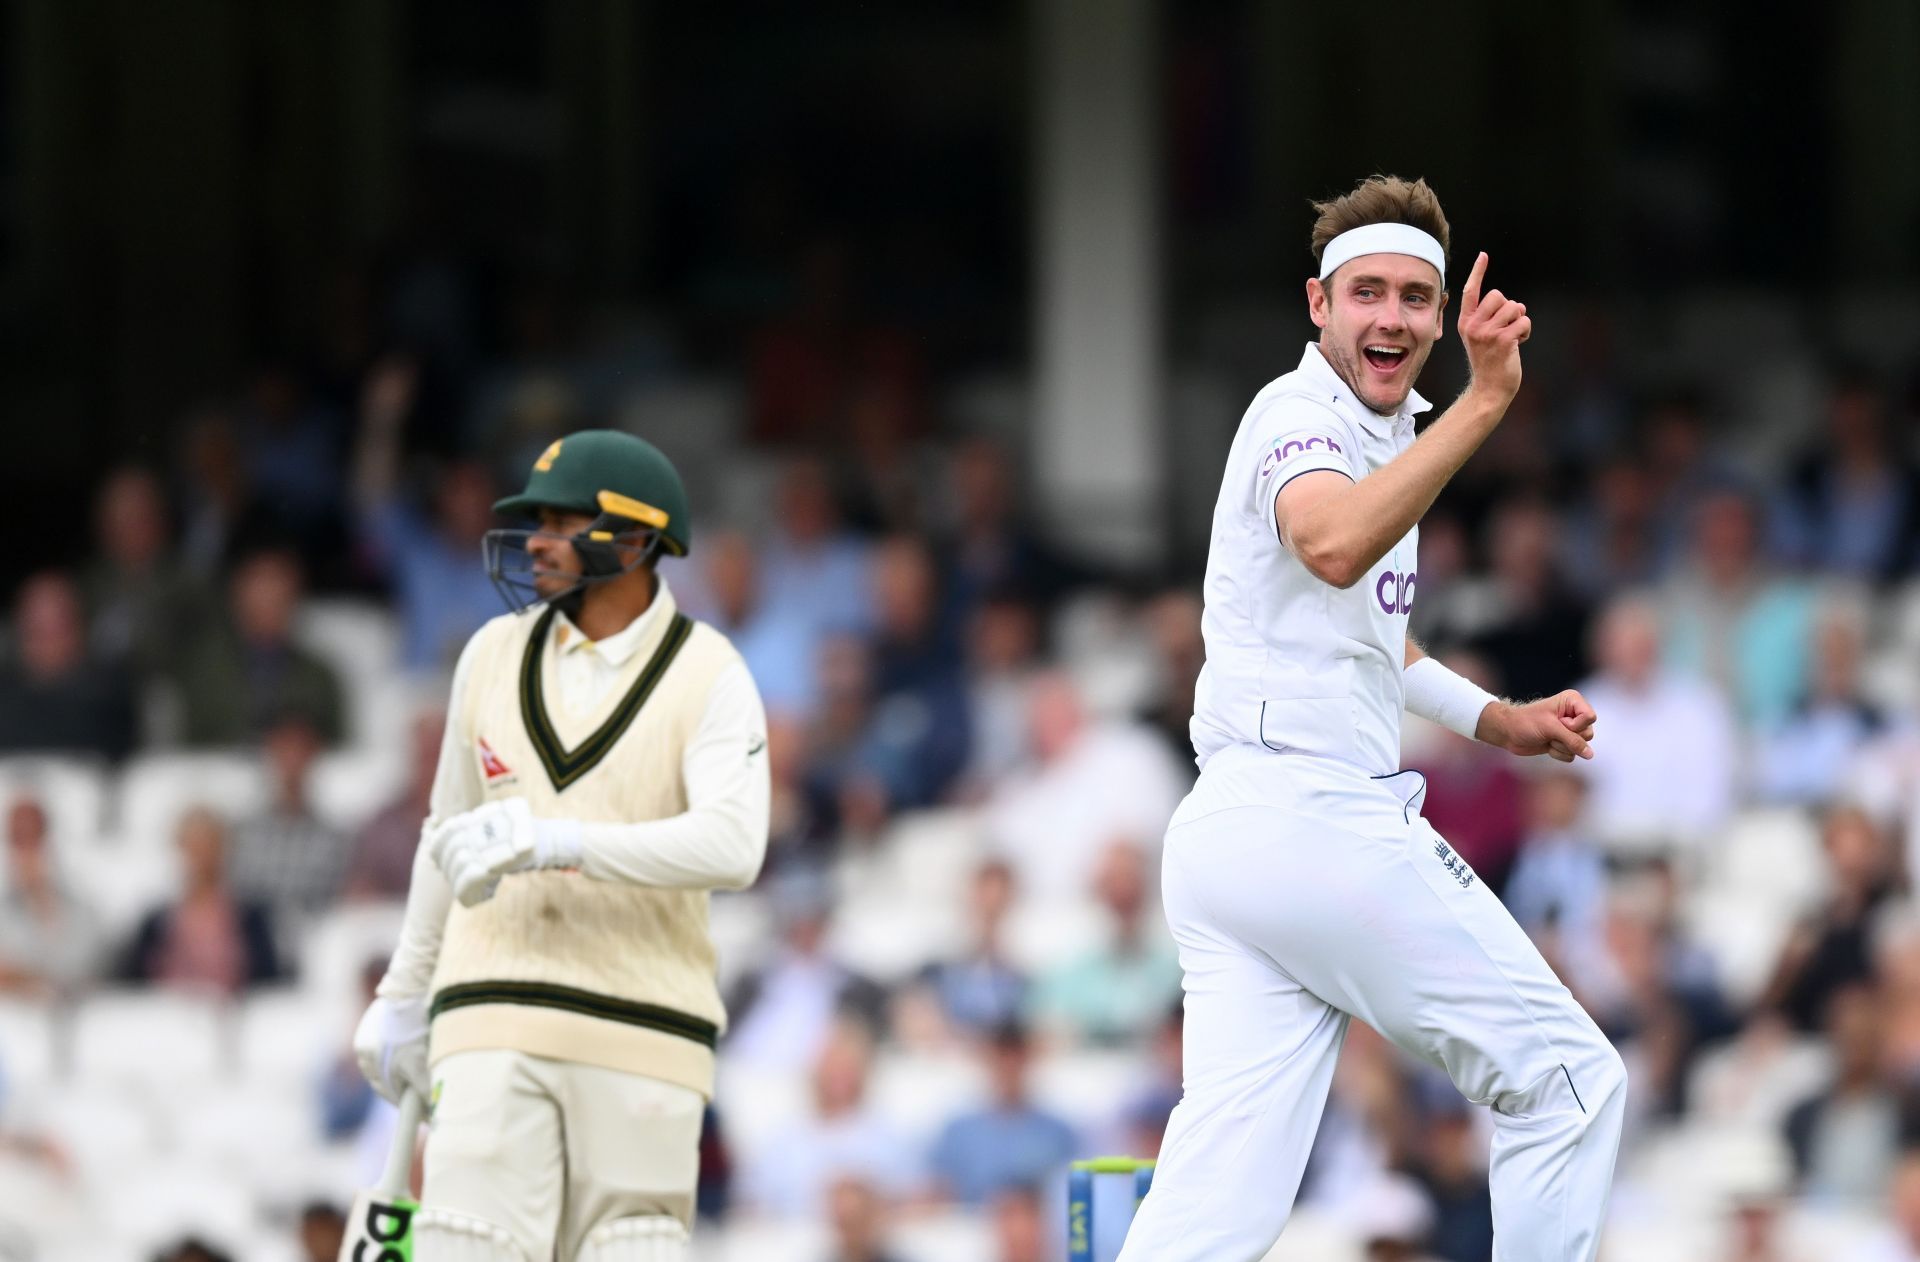 The England pacer celebrates the wicket of Usman Khawaja. (Pic: Getty Images)